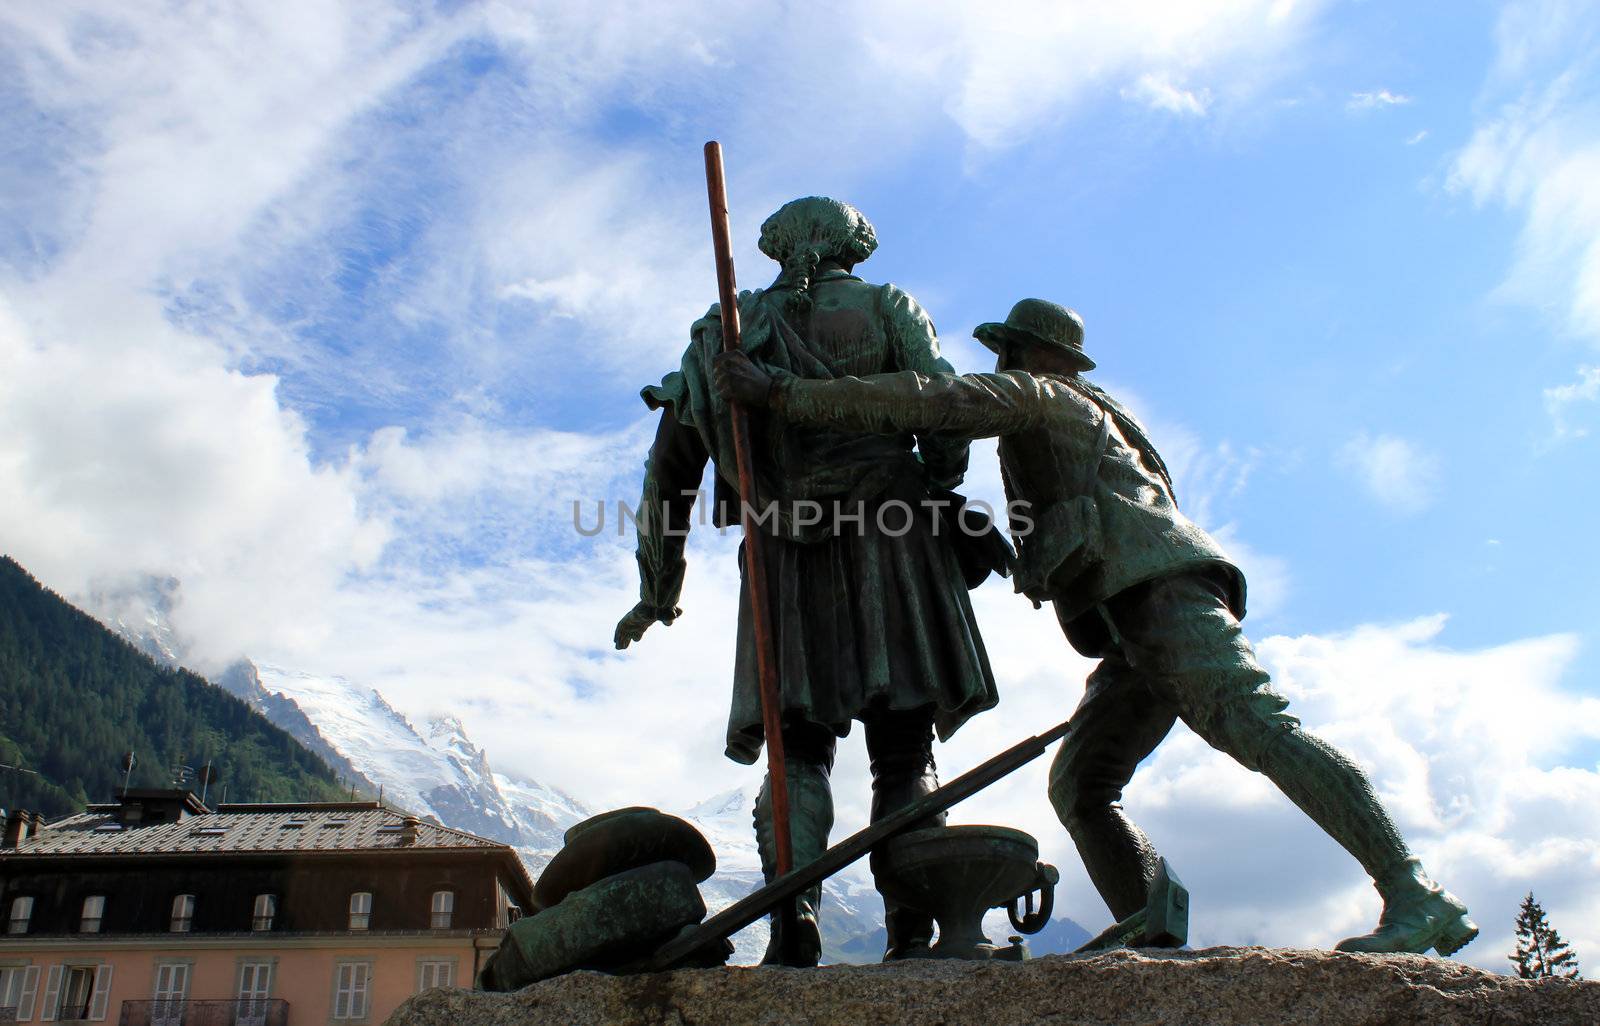 Sculpture of the guide showing the Mont-Blanc to Mr De Saussure, Chamonix, France